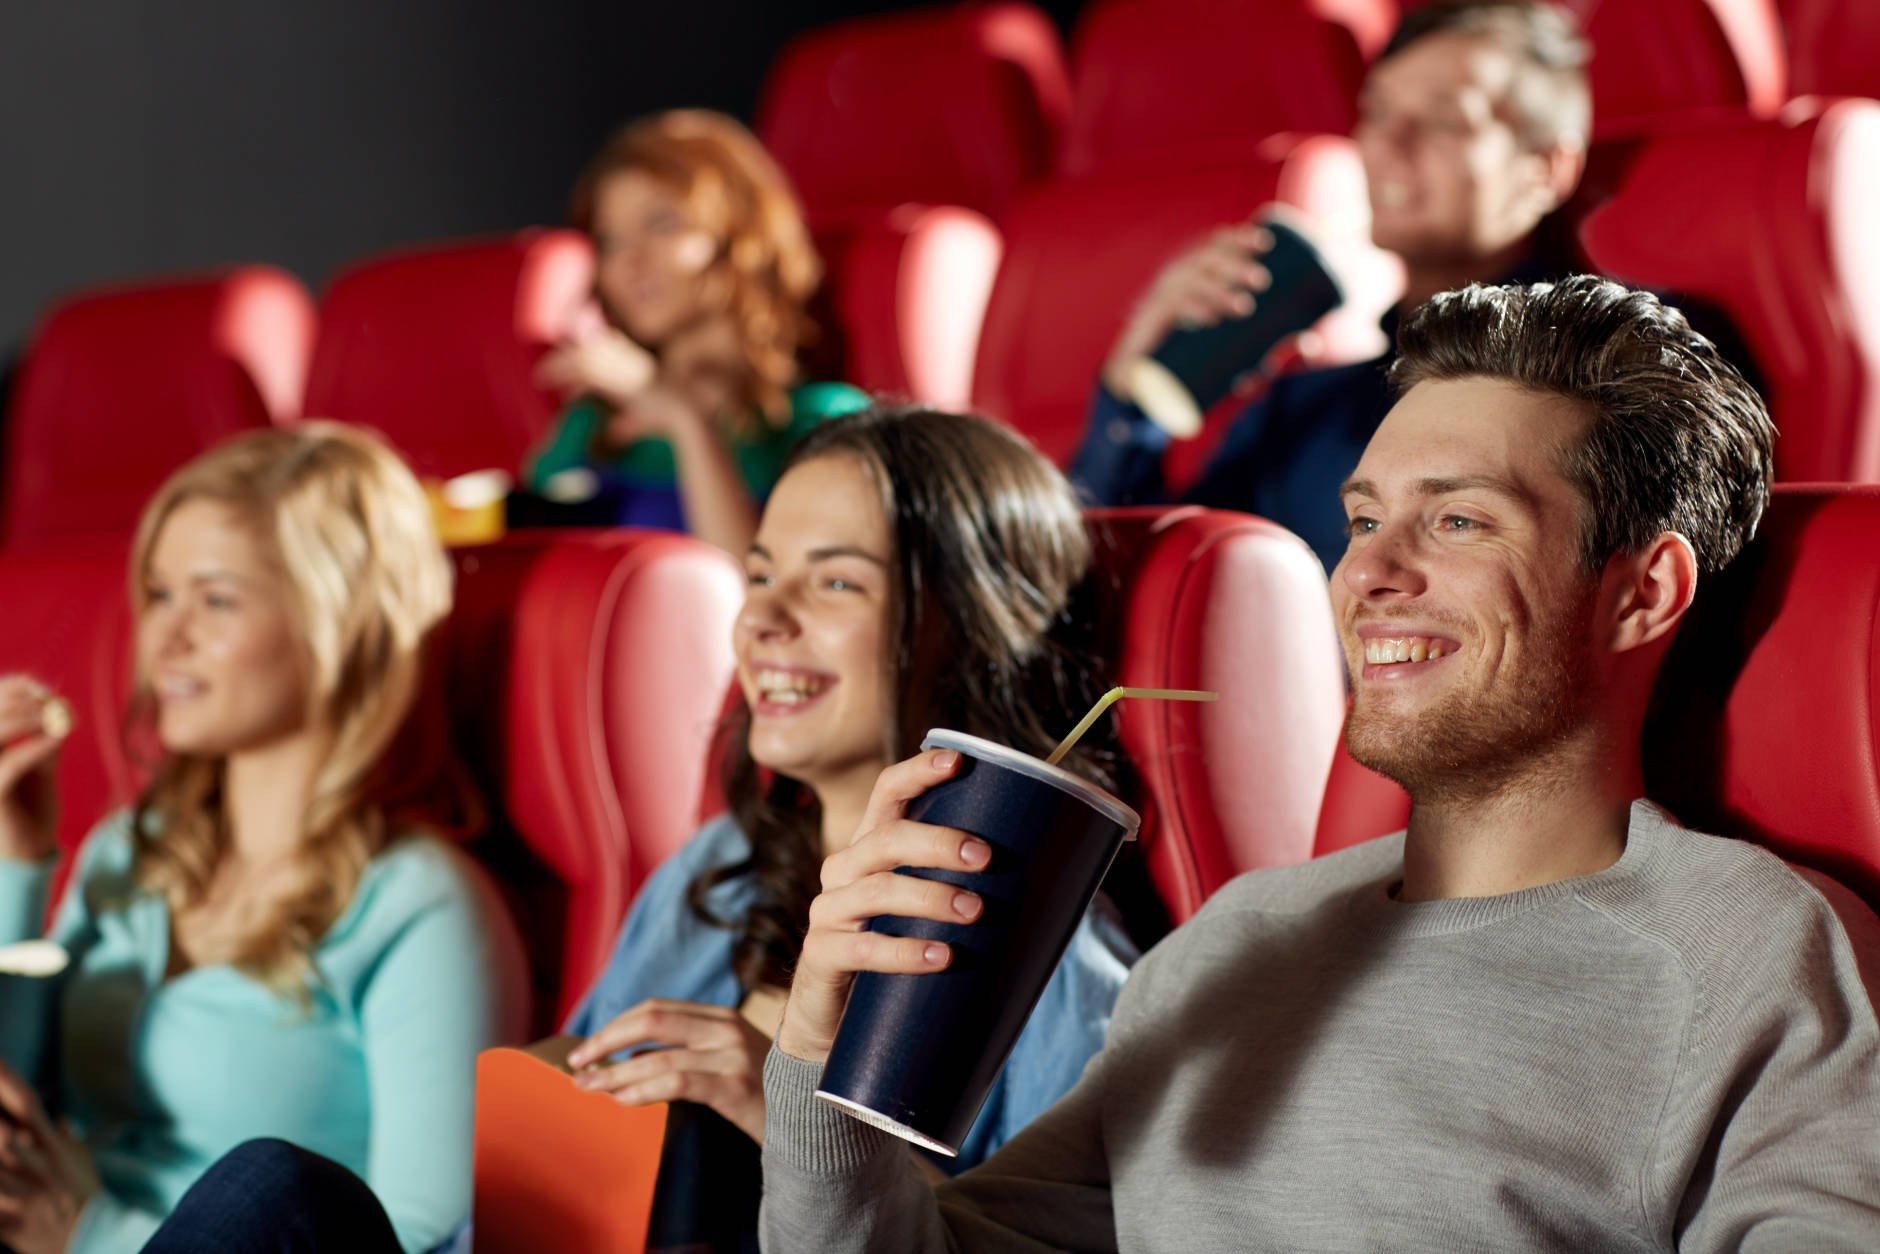 Need a gift for a film buff who regularly goes out to the movies? A MoviePass.com membership allows you to see an unlimited number of films for just $30 a month. But 3-D and IMAX movies are not included.